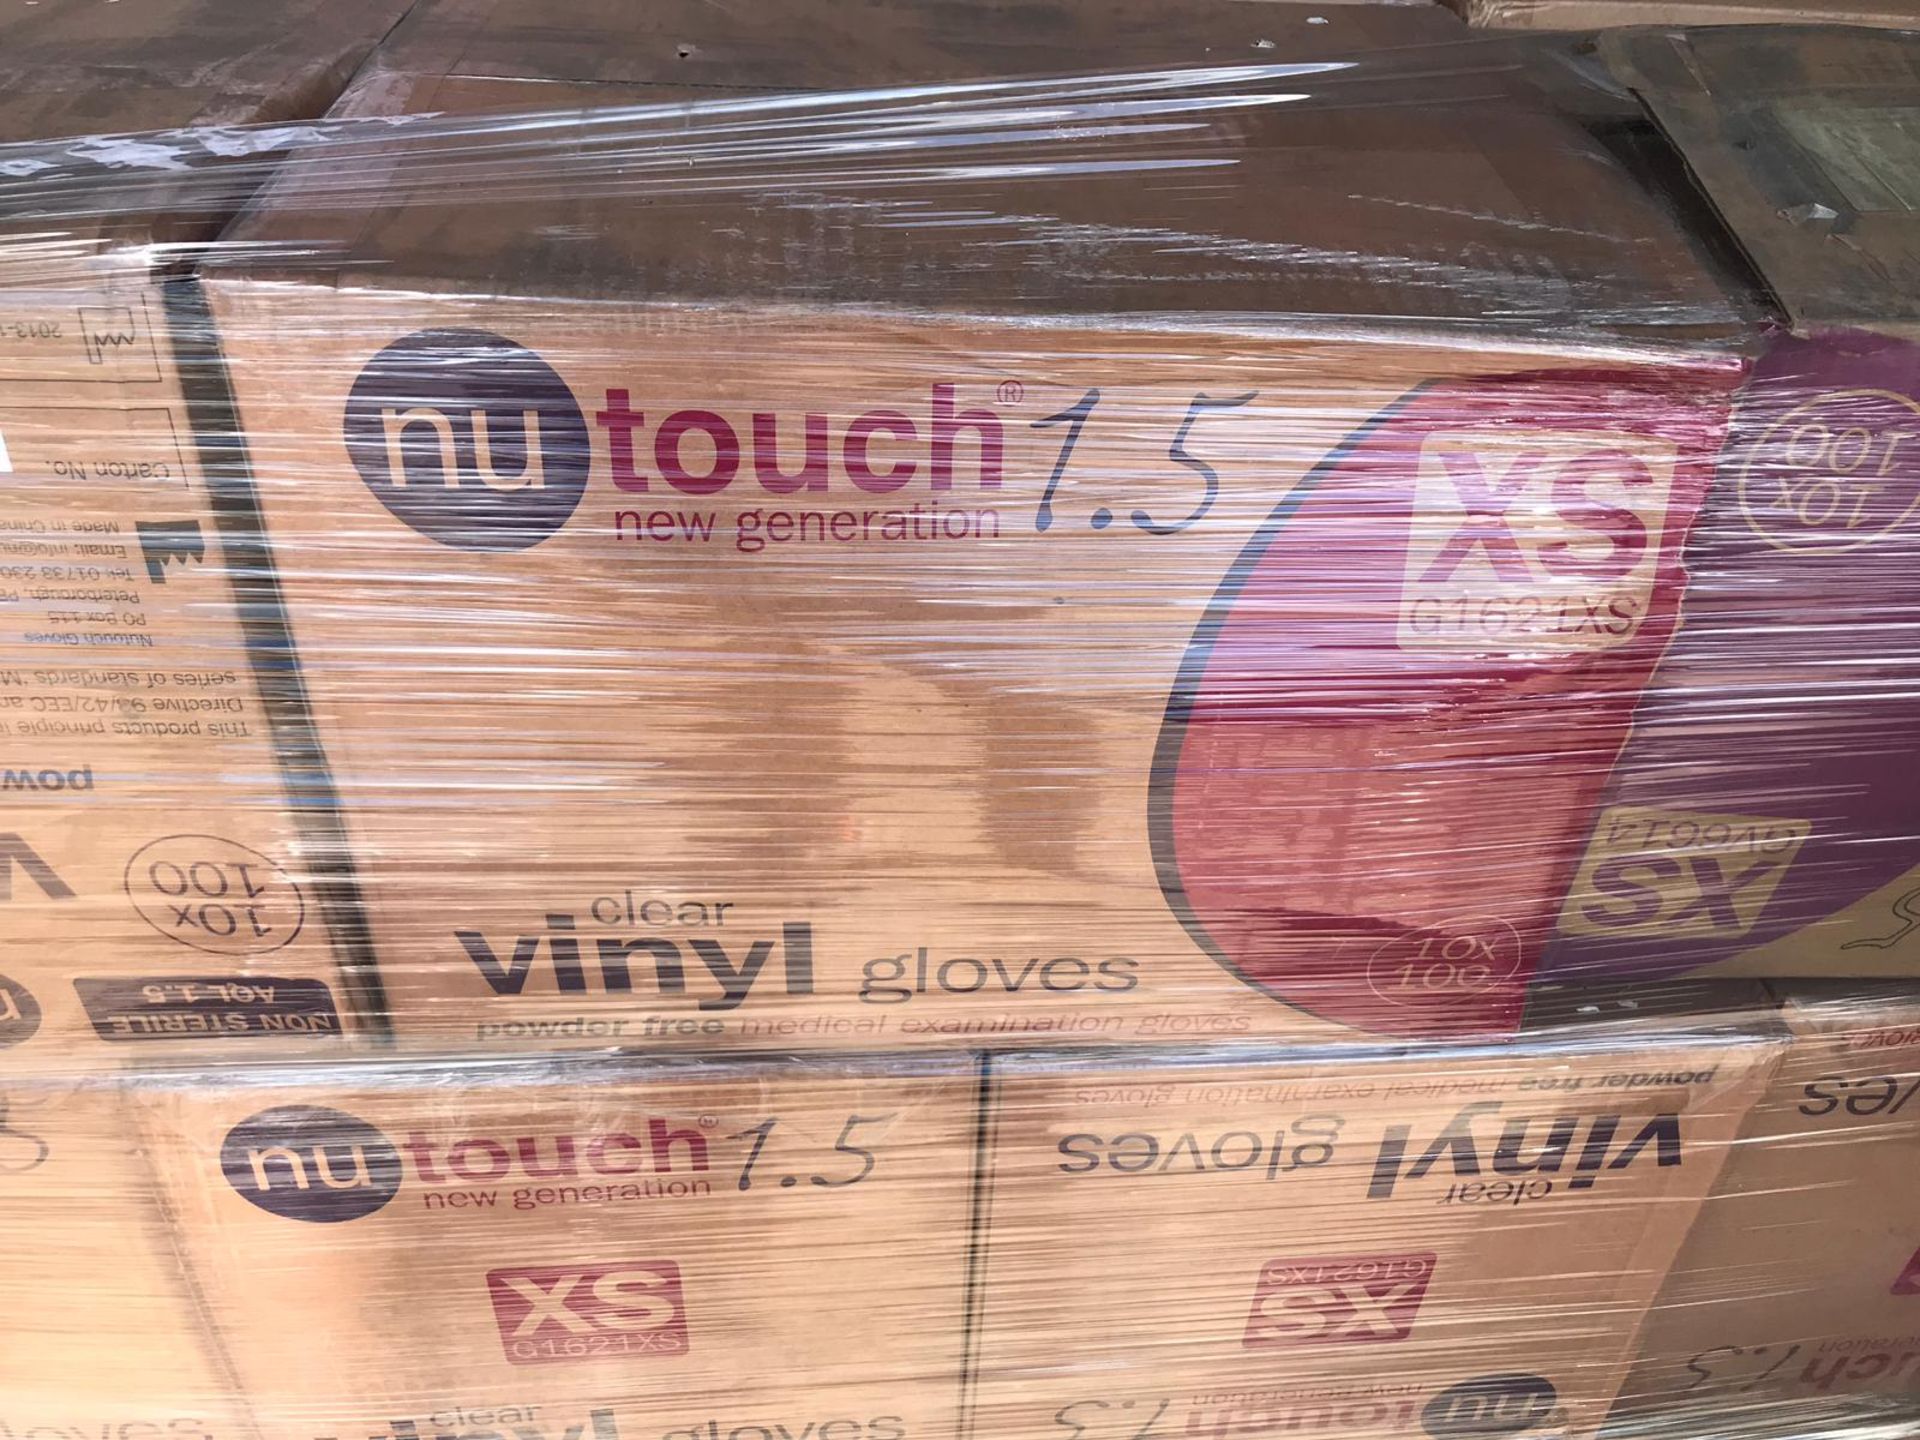 CLEAR VINYL GLOVES (POWDER FREE) X SMALL 70 CASES ON PALLET - Image 2 of 2